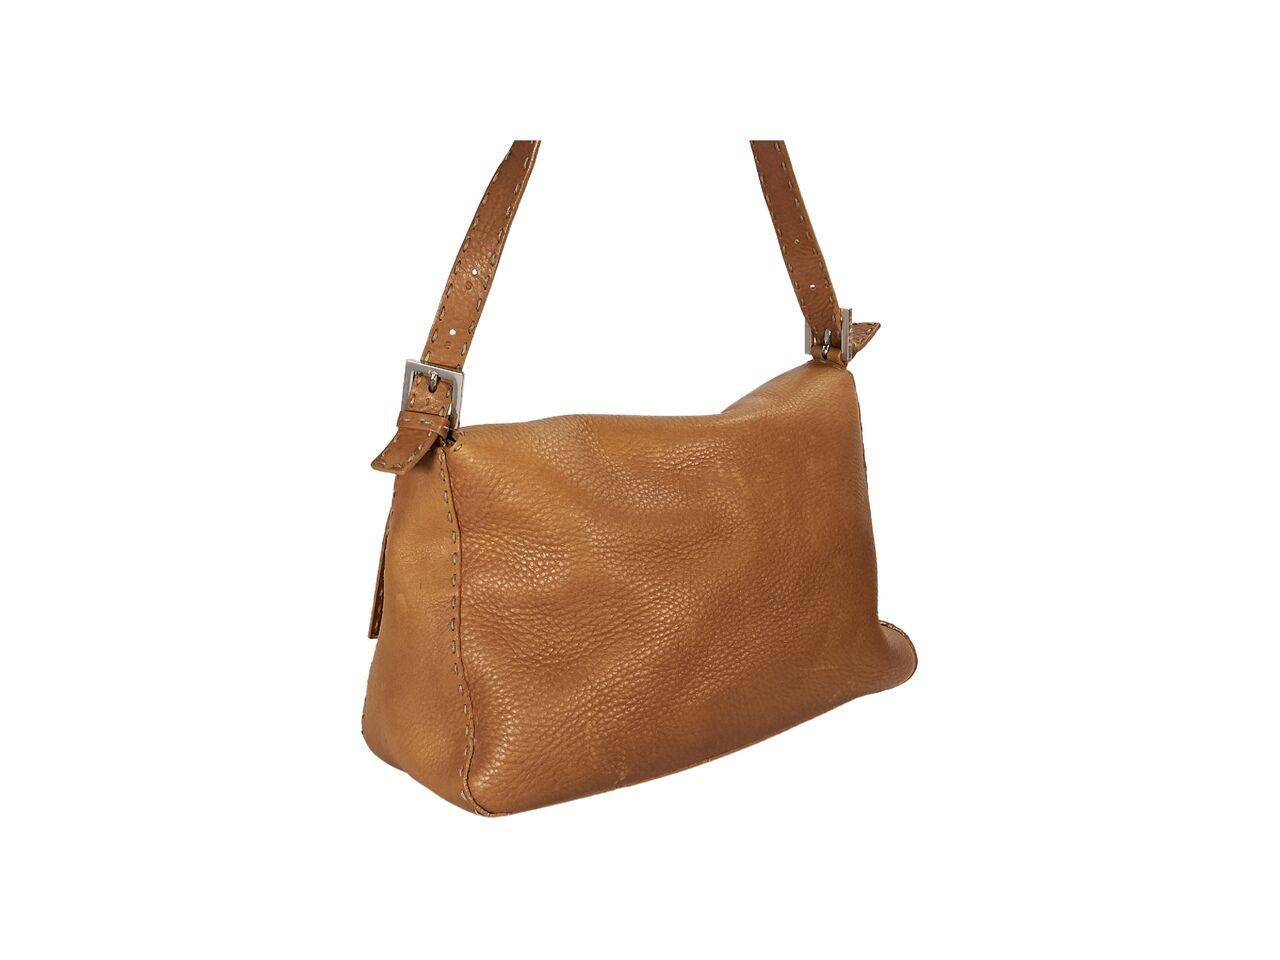 Product details:  Tan soft pebbled leather Selleria shoulder bag by Fendi.  Features topstitched trim.  Single shoulder strap.  Front flap.  Lined interior with inner zip pocket.  11.5